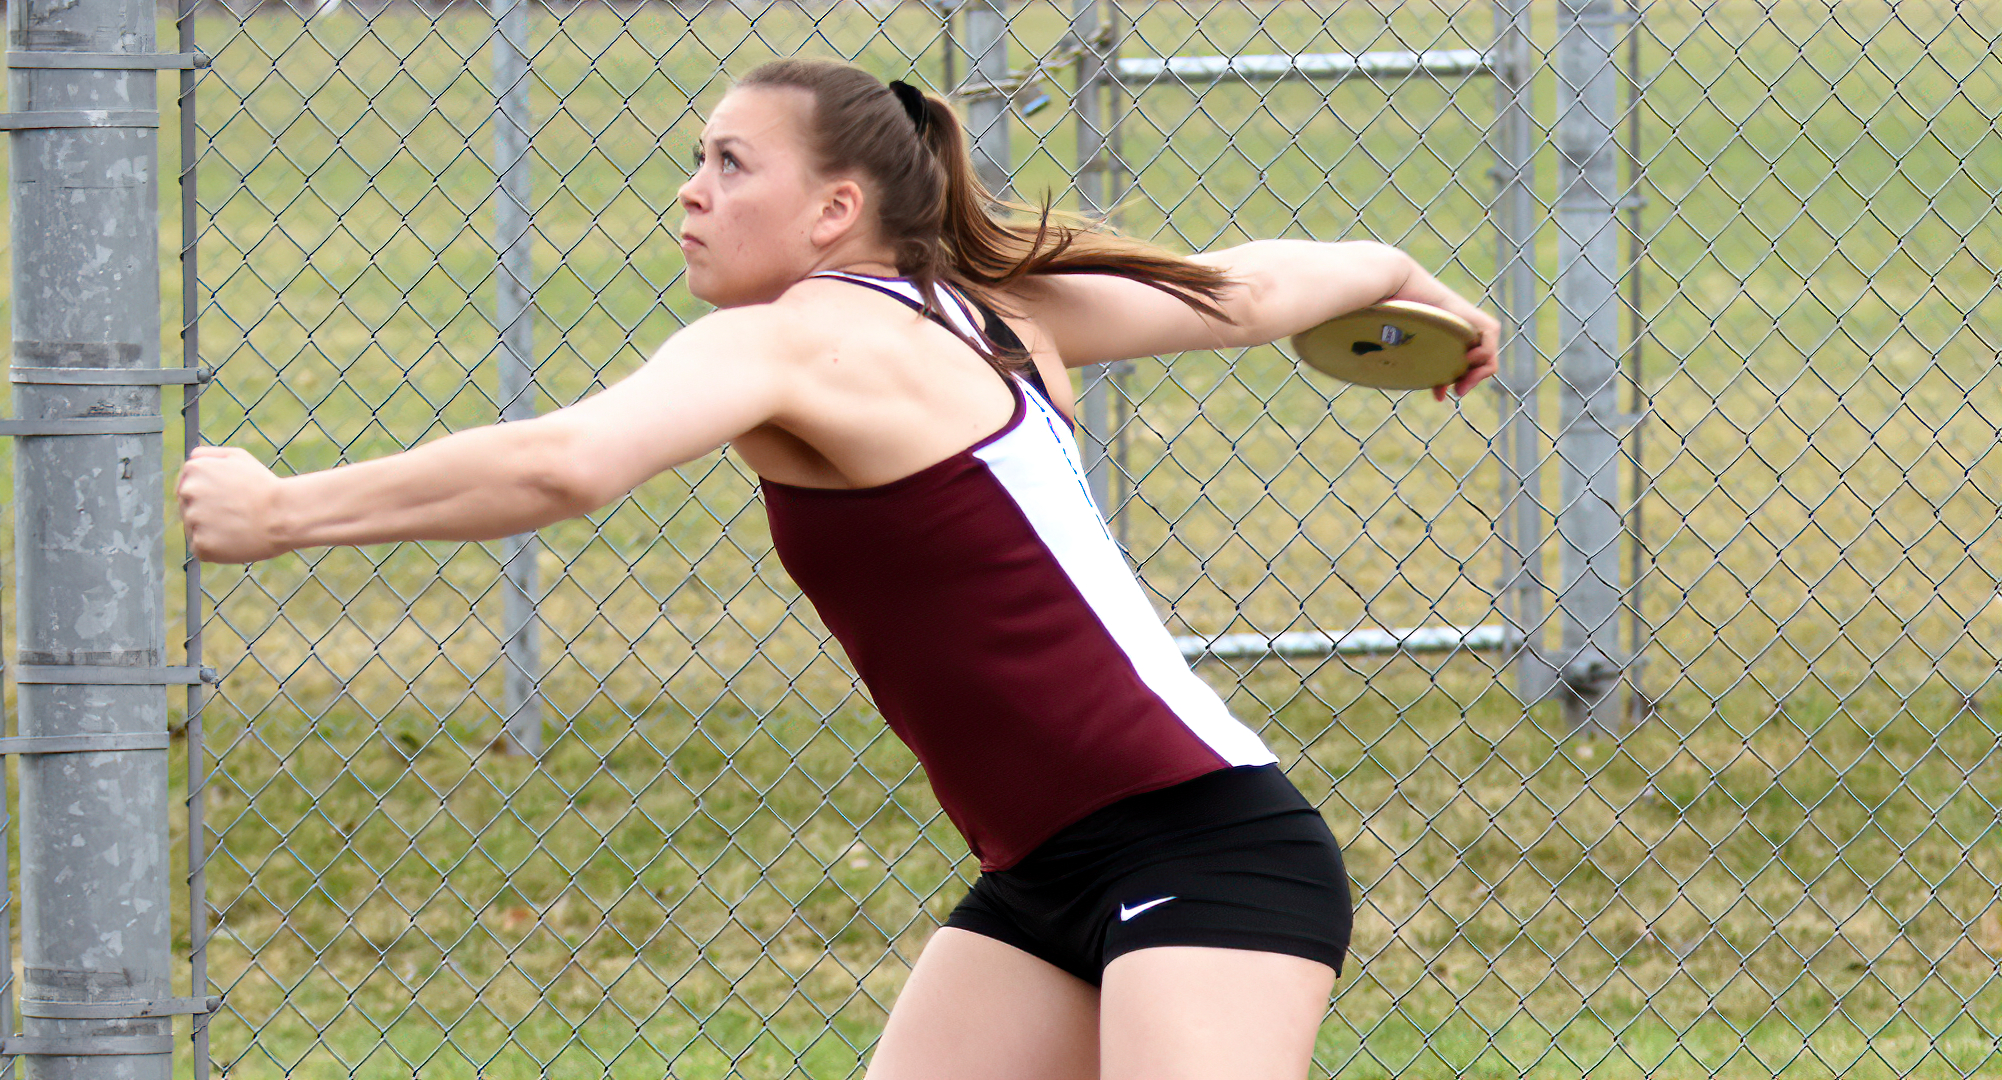 Cayle Hovland won the discus at the Ole Open with a PR mark of 146-04 which is the 12th best in DIII this year and the fifth farthest in school history.